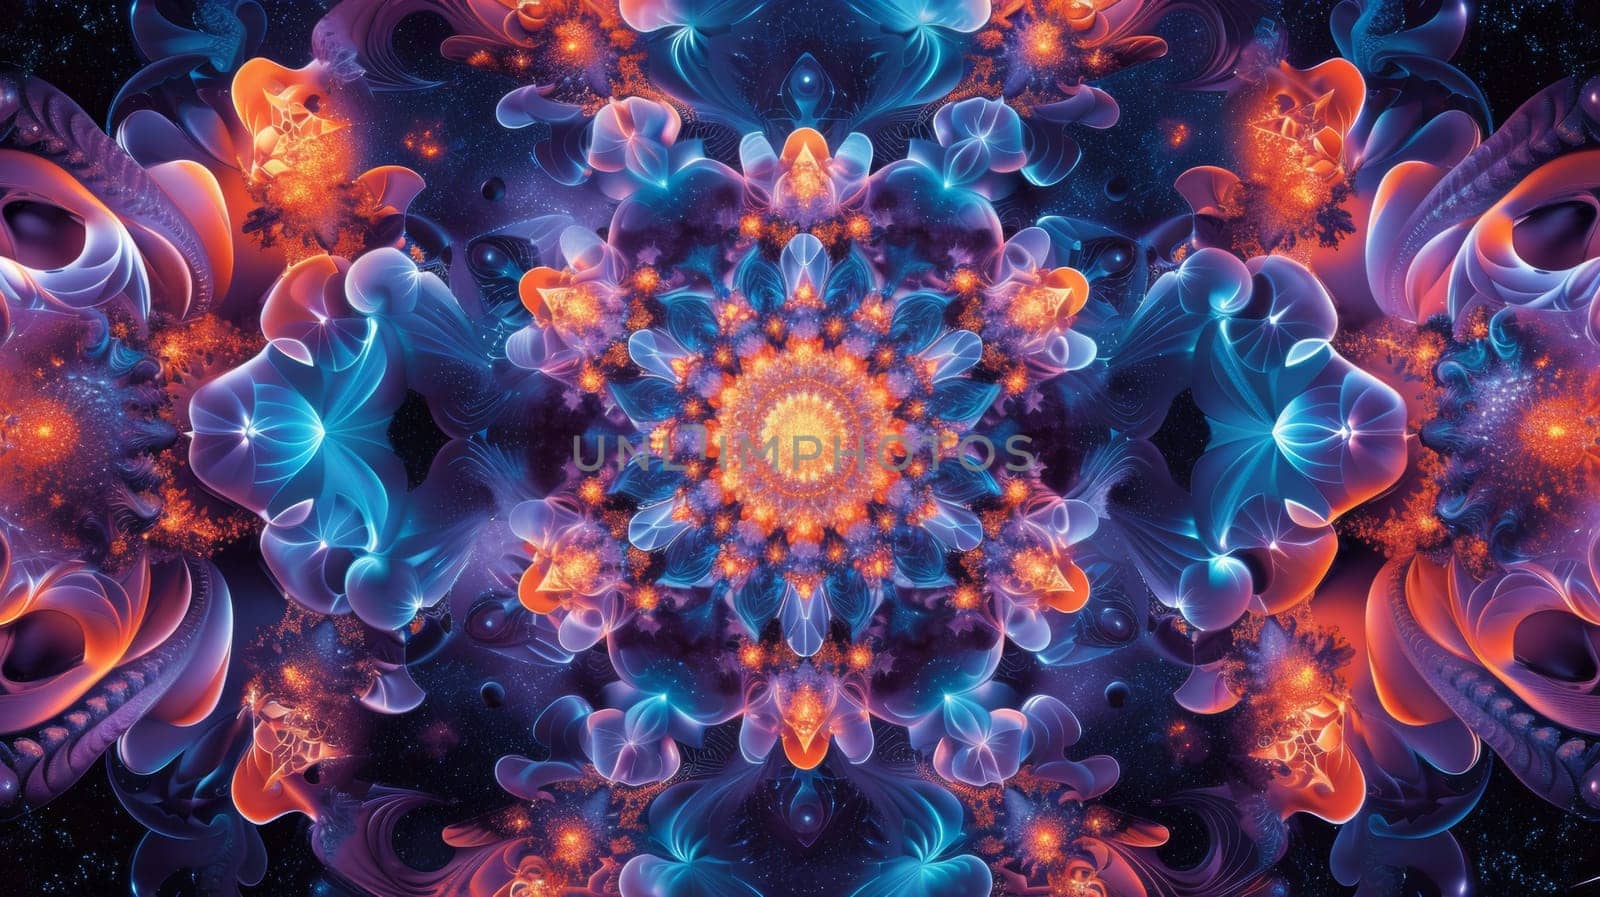 A psychedelic pattern of blue and orange flowers with a purple background